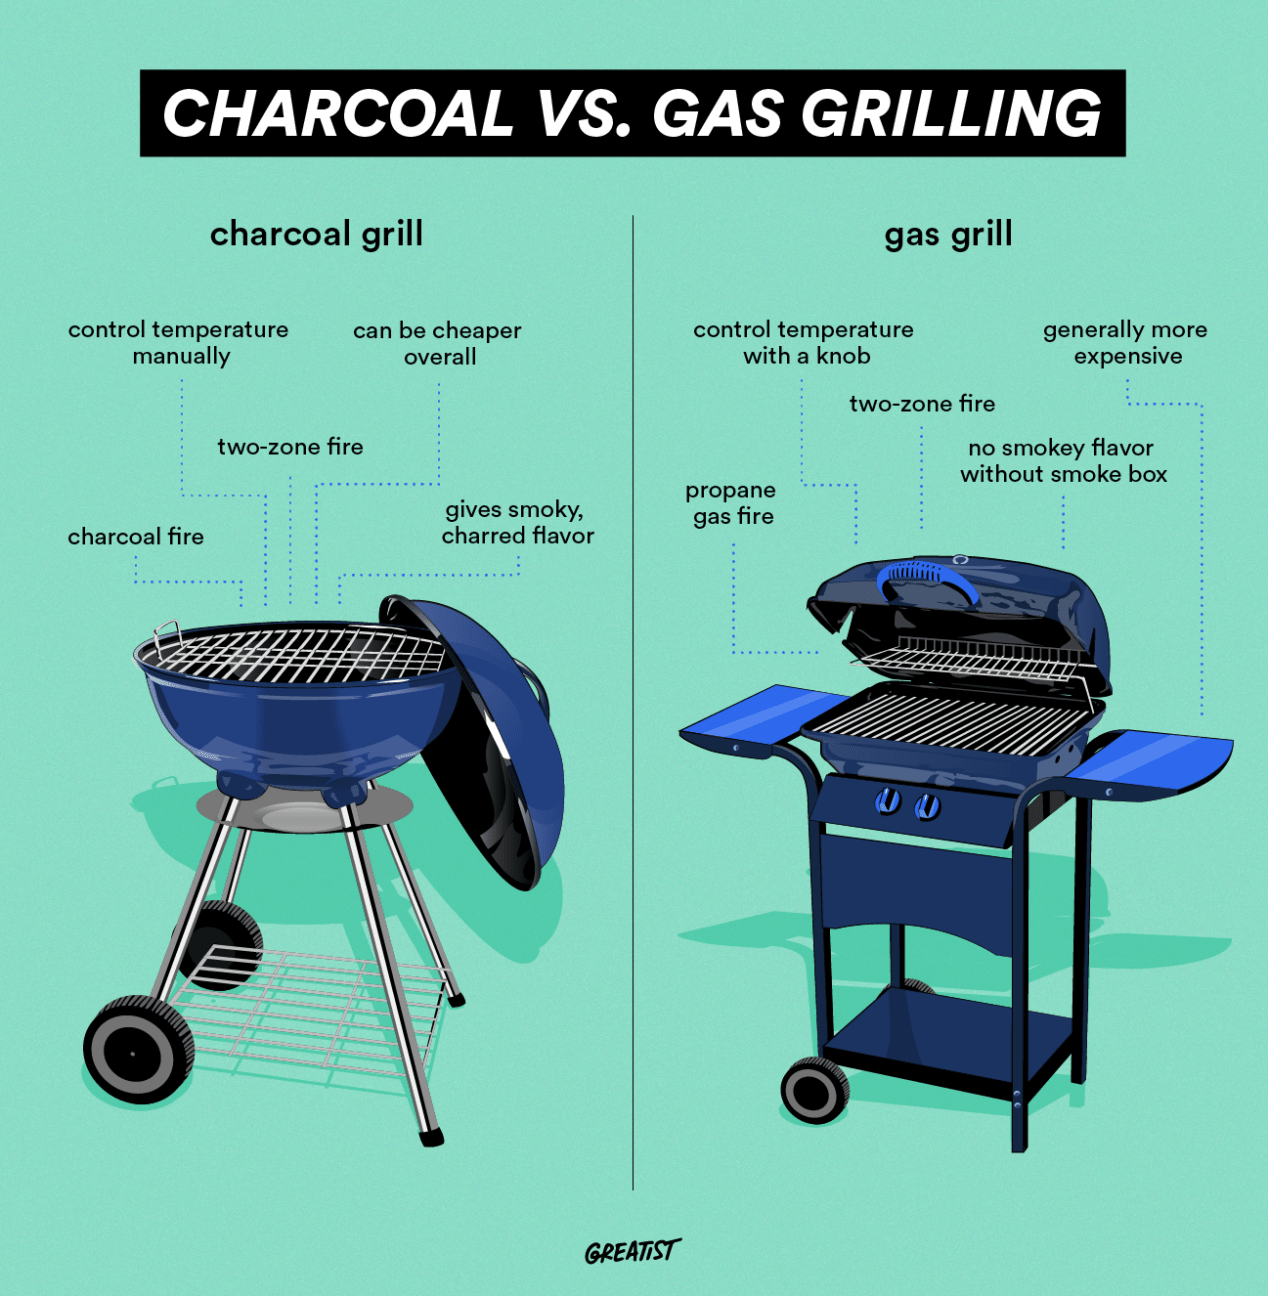 charcoal grill vs gas grill